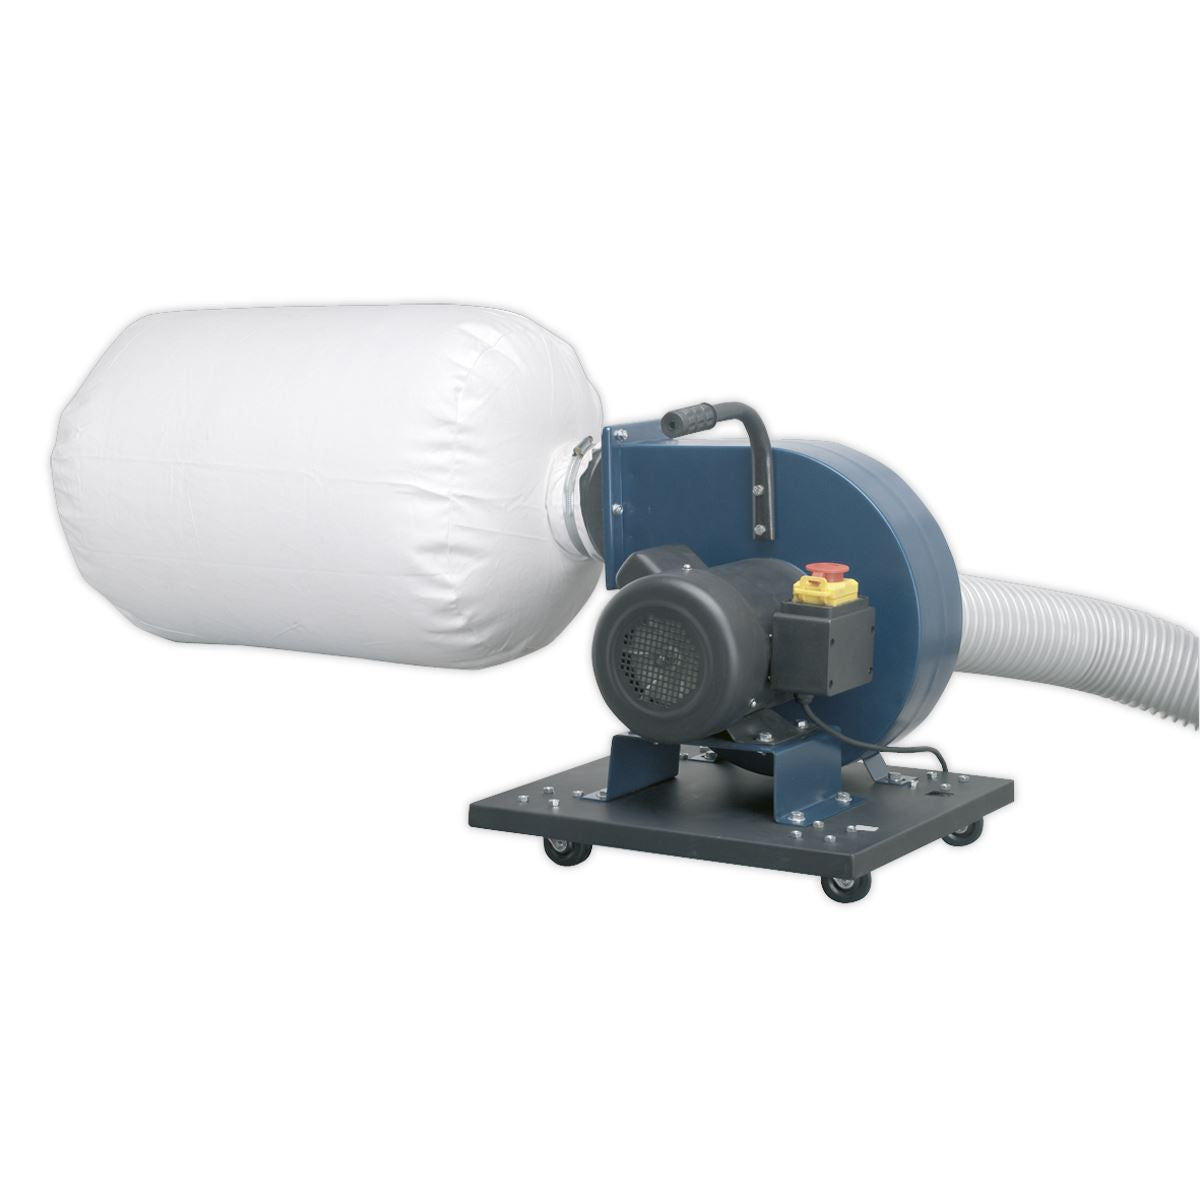 Sealey Dust and Chip Extractor 1HP 230V 750W